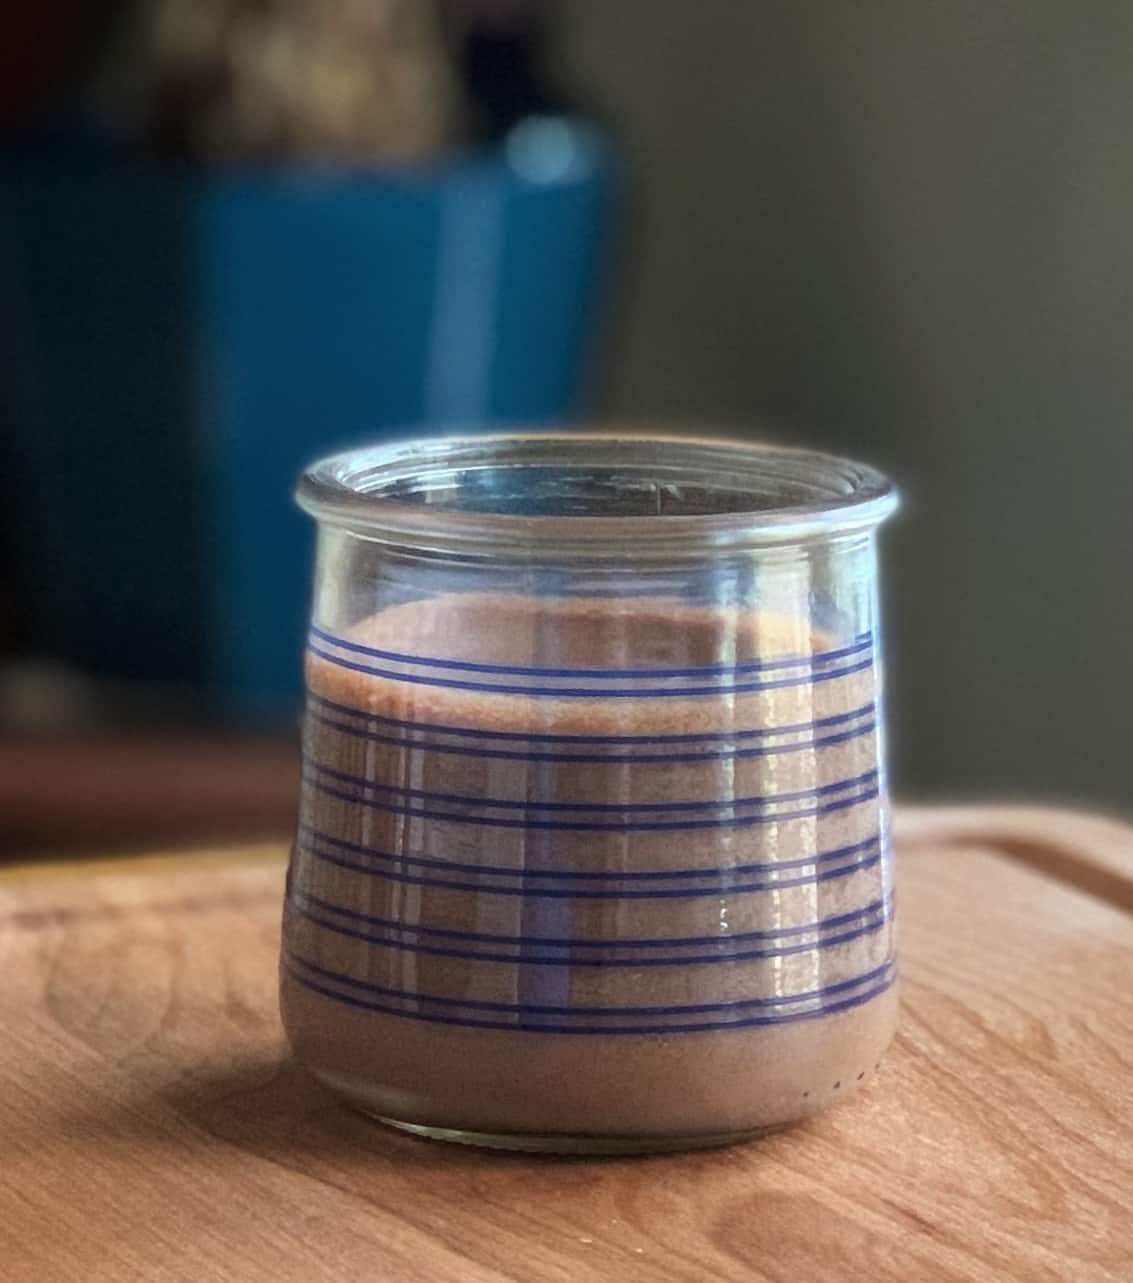 Pots de Creme topped with whipped cream in a blue-striped glass jar